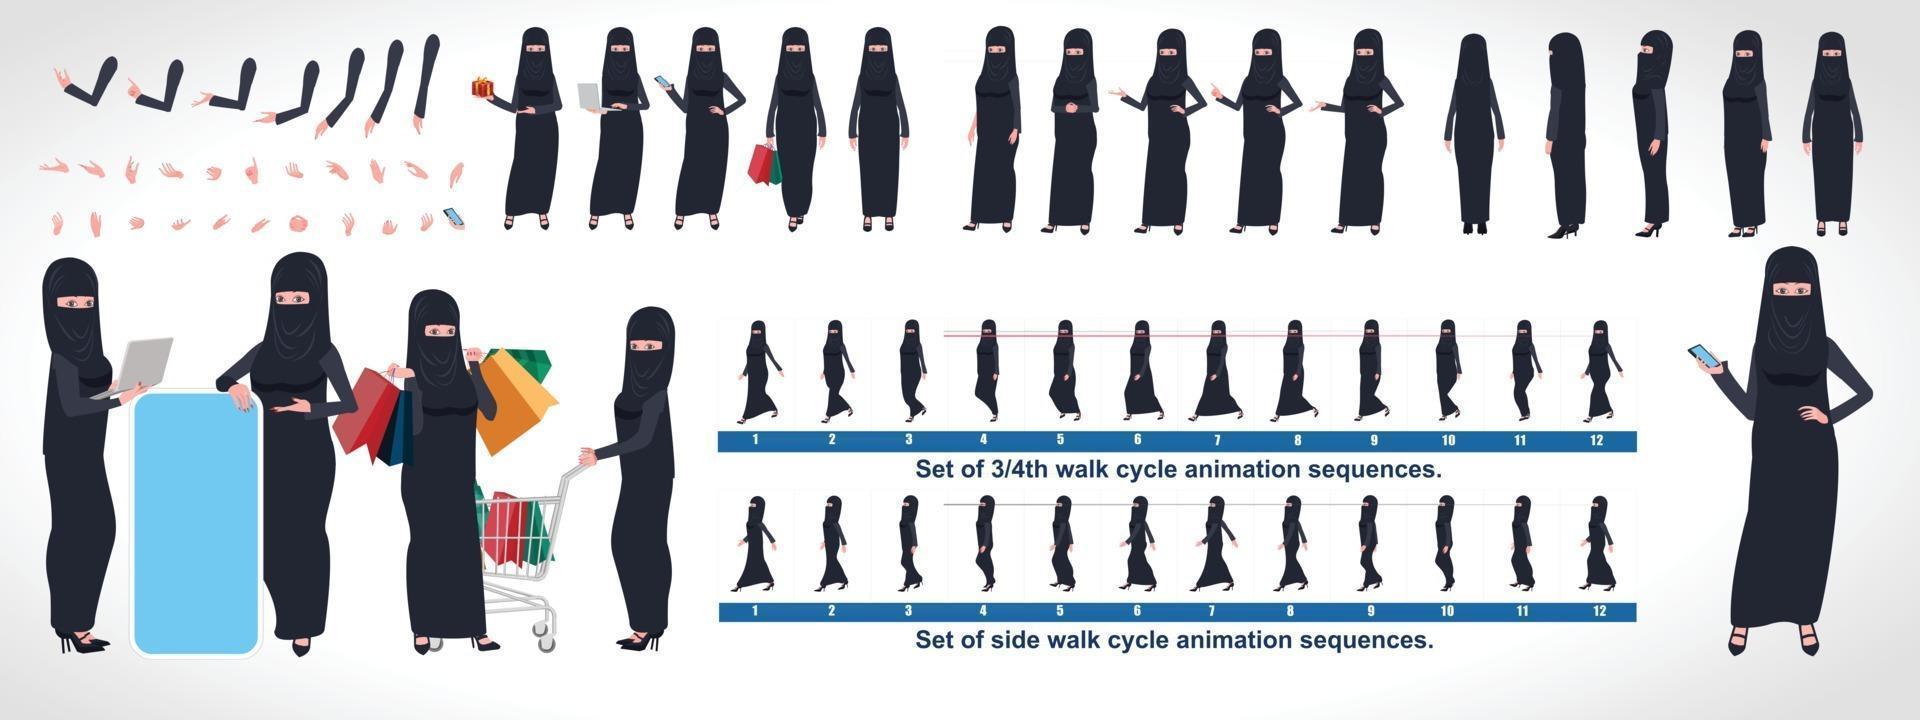 Islamic Girl Character Design Model Sheet with walk cycle animation Girl Character design Front side back view and explainer animation poses Character set with various views and lip sync vector